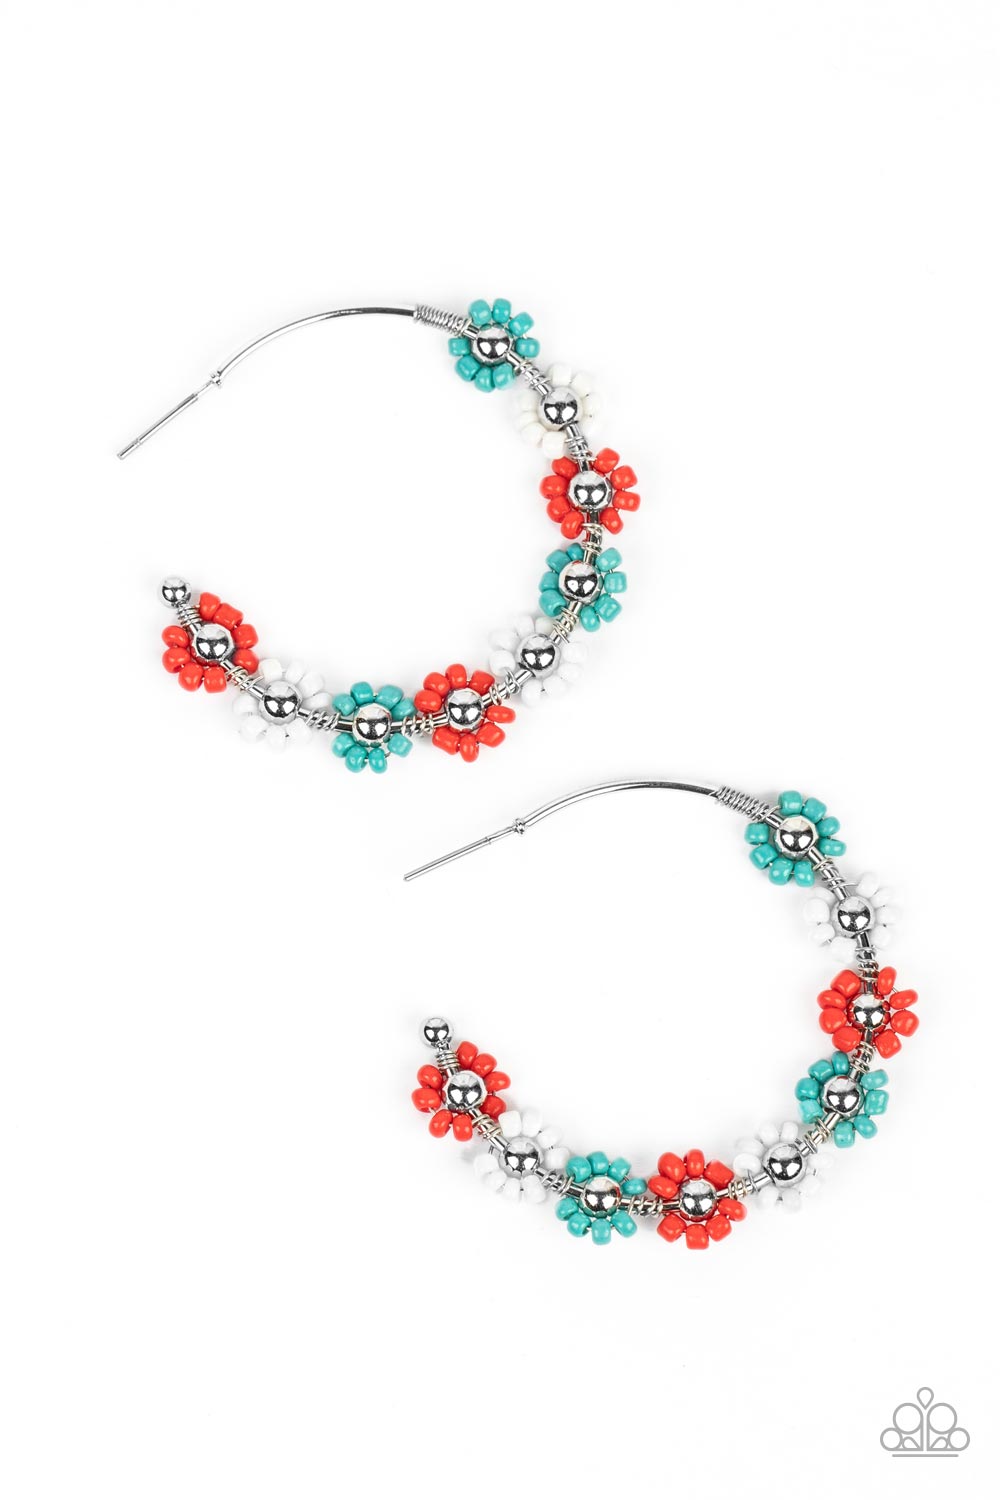 Paparazzi Growth Spurt Red Earrings. Floral Multi colored Red Hoop. #P5HO-RDXX-027XX. Free Shipping